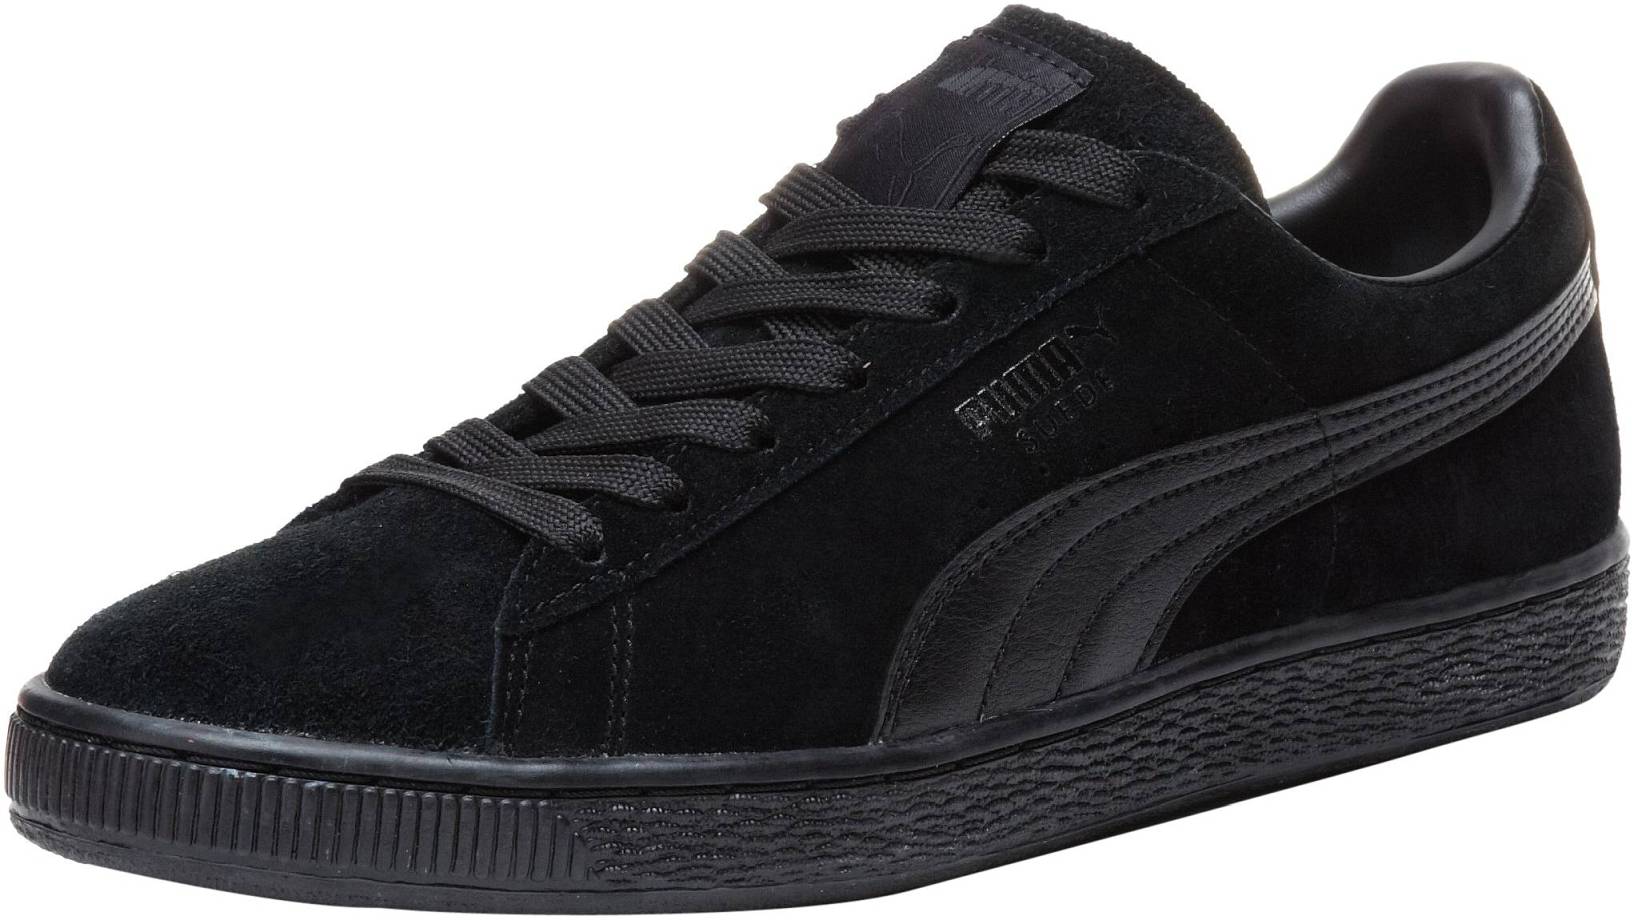 Puma Suede Classic + LFS – Shoes Reviews & Reasons To Buy